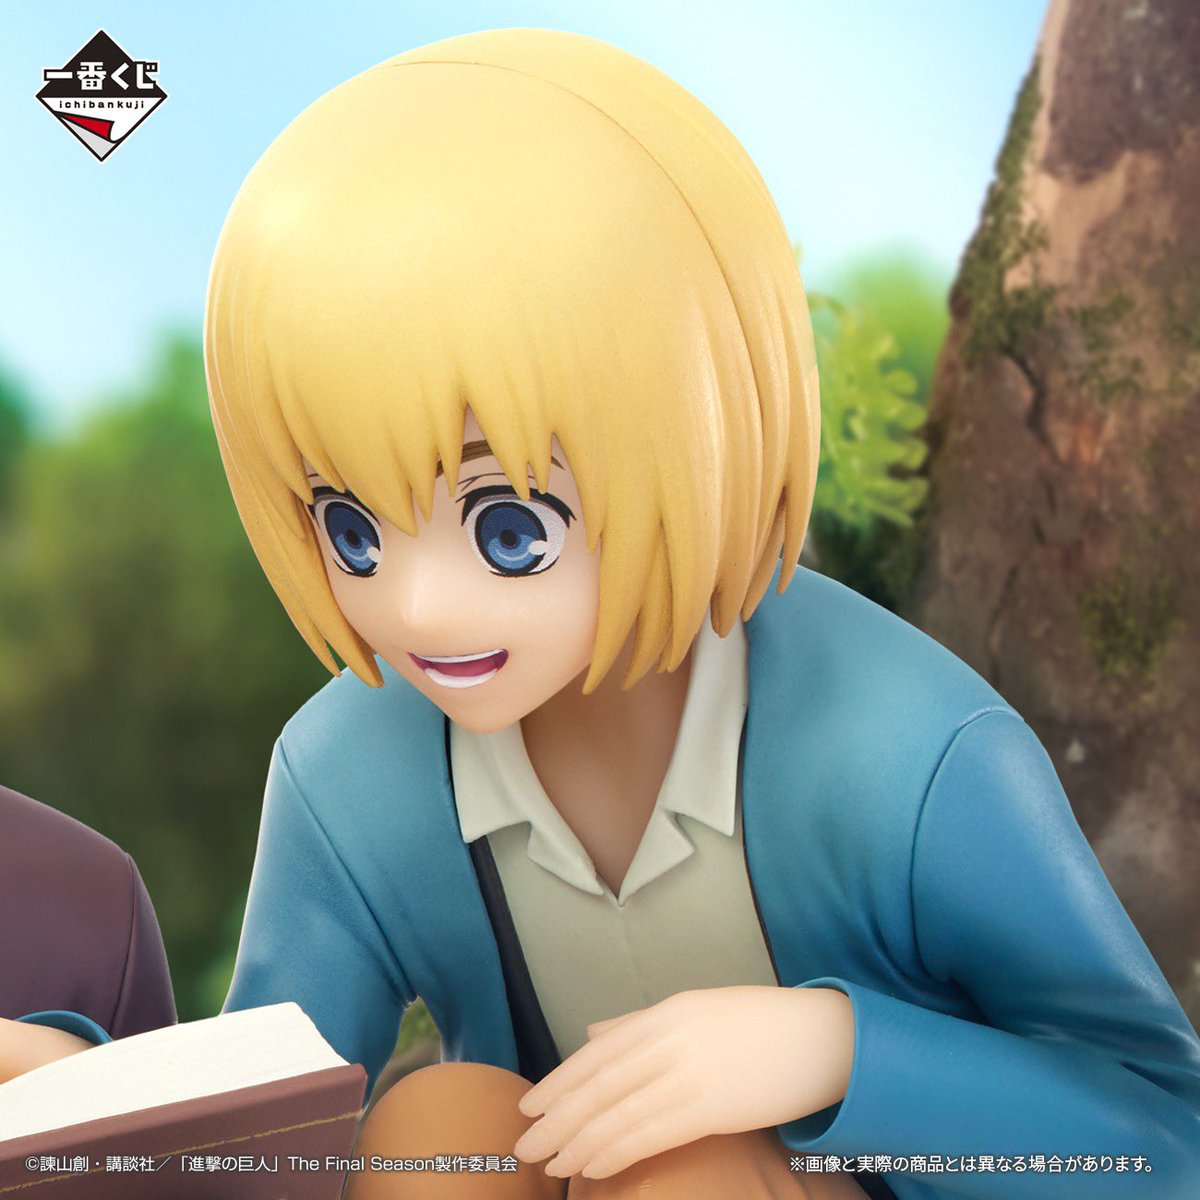 Mikasa and Armin now revealed for the E.M.A Figure